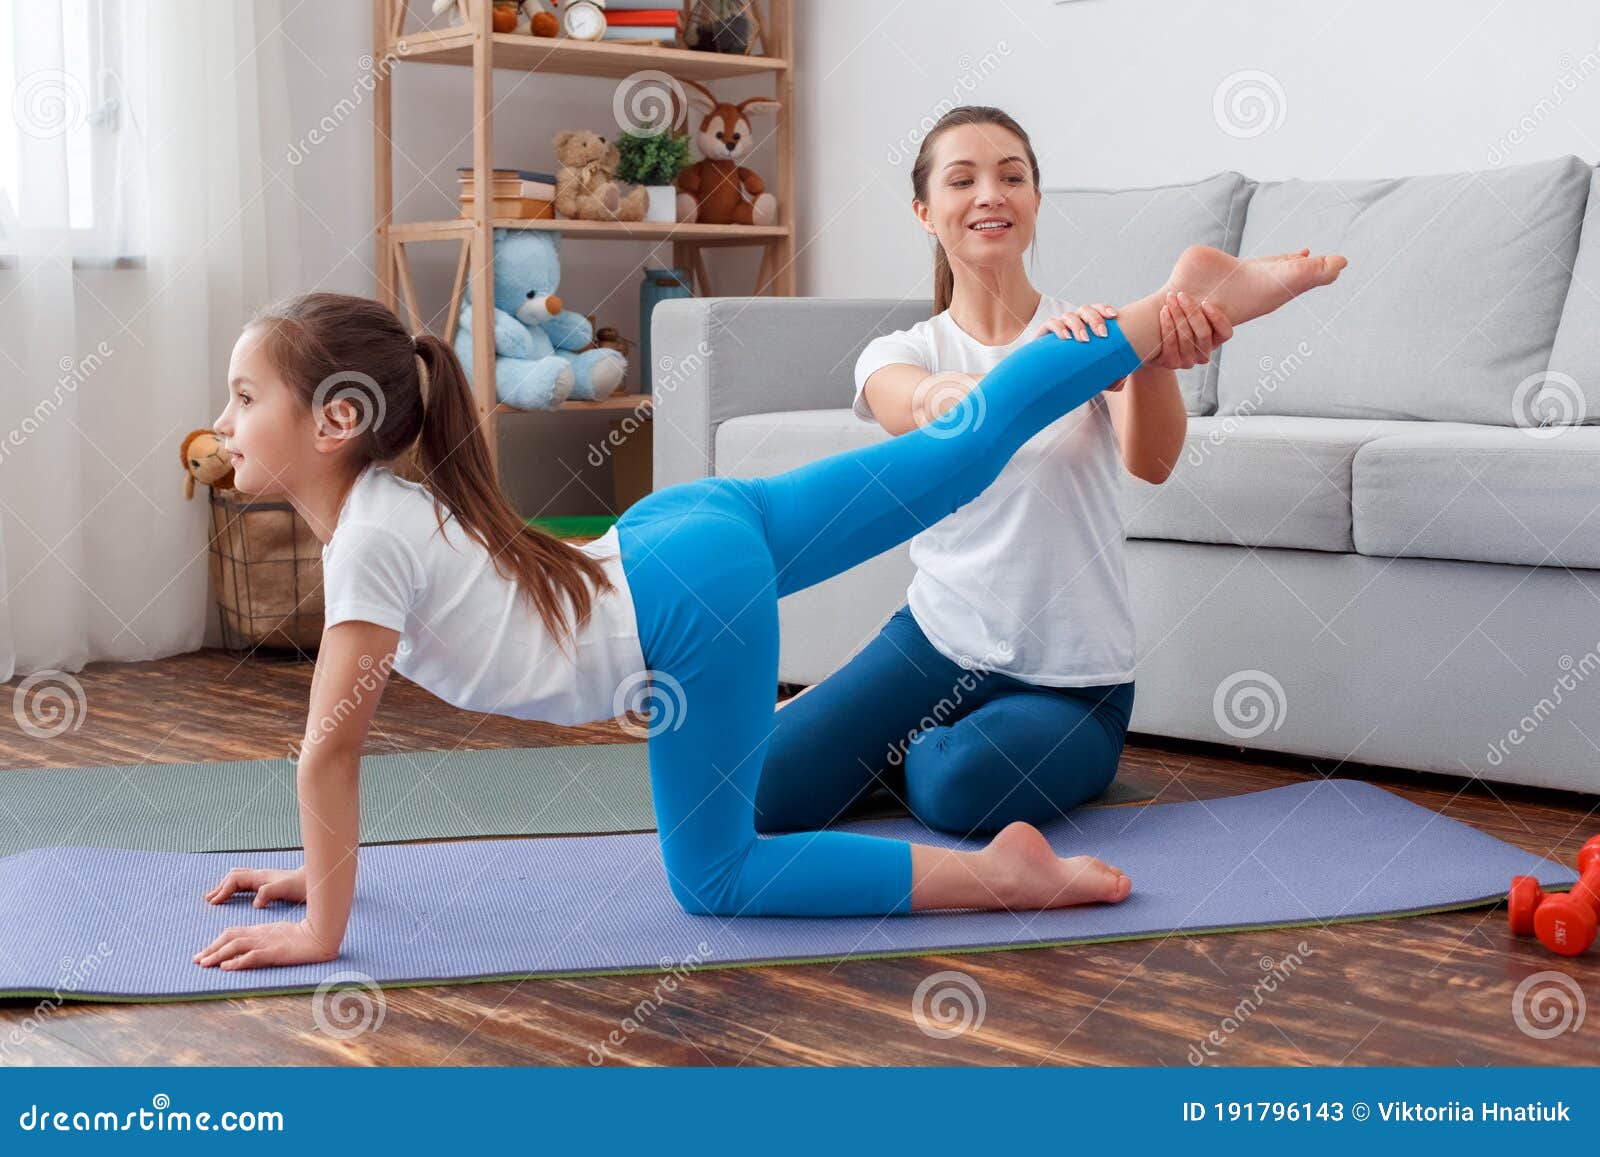 Healthy Lifestyle. Mother Assisting Daughter In Sportswear Practicing